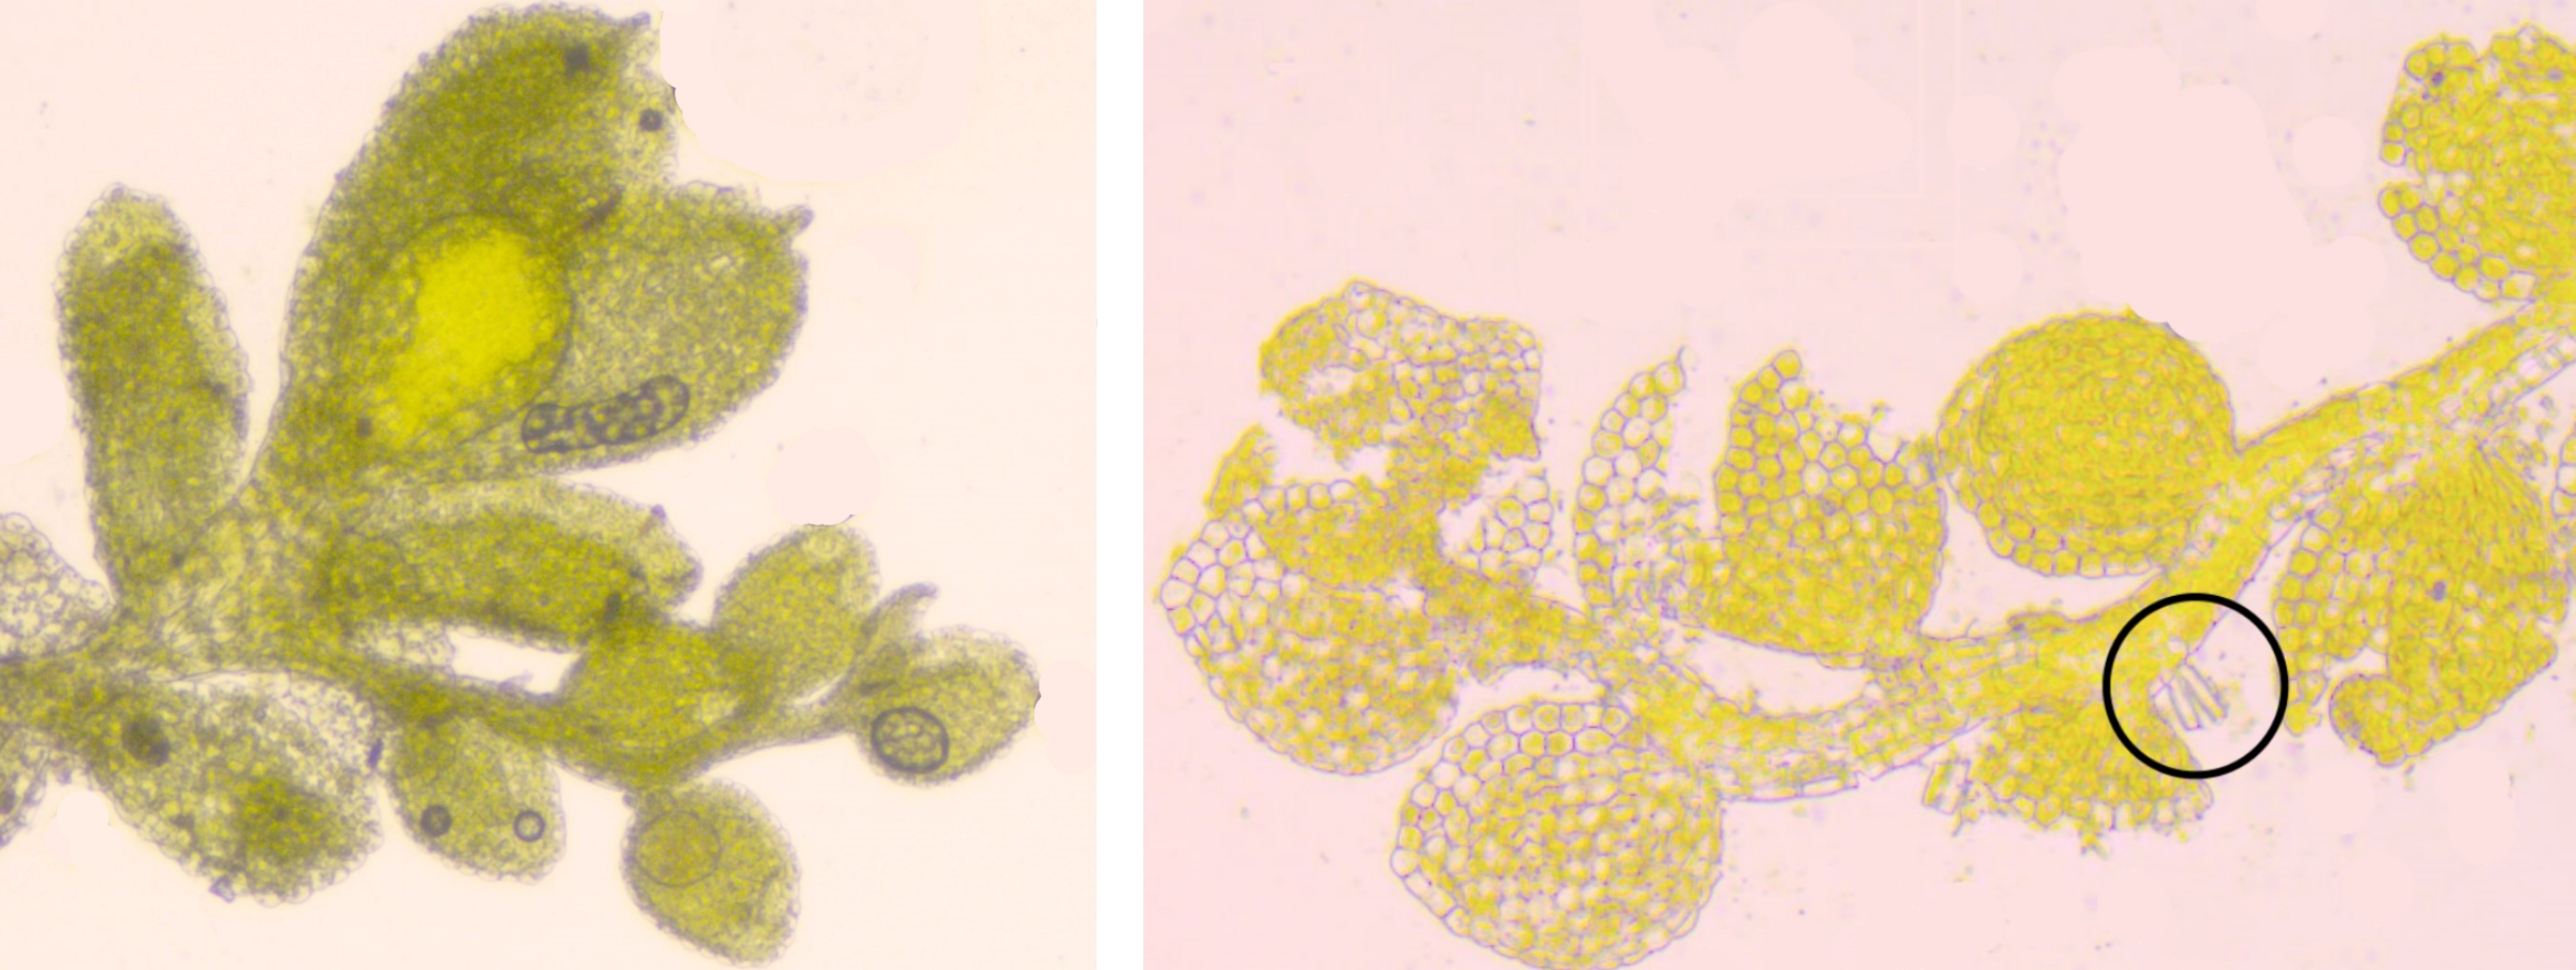 Left: Cololejeunea minutissima showing fertile branch with large perianth leaves. Right: Microlejeunea ulicina showing underleaf (circled). Images by D. Morris